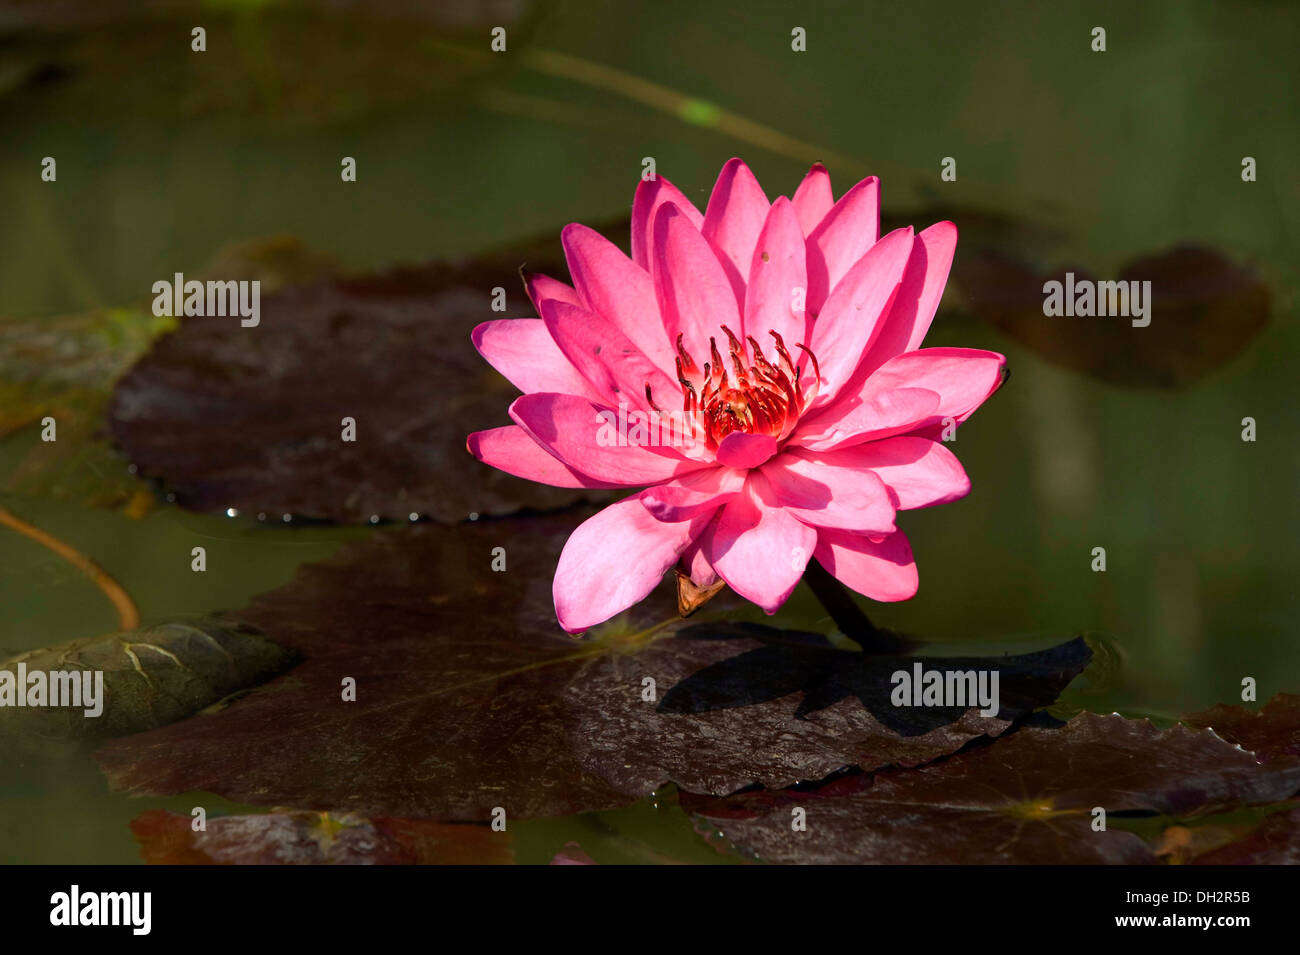 Star Water Lily flower Banque D'Images